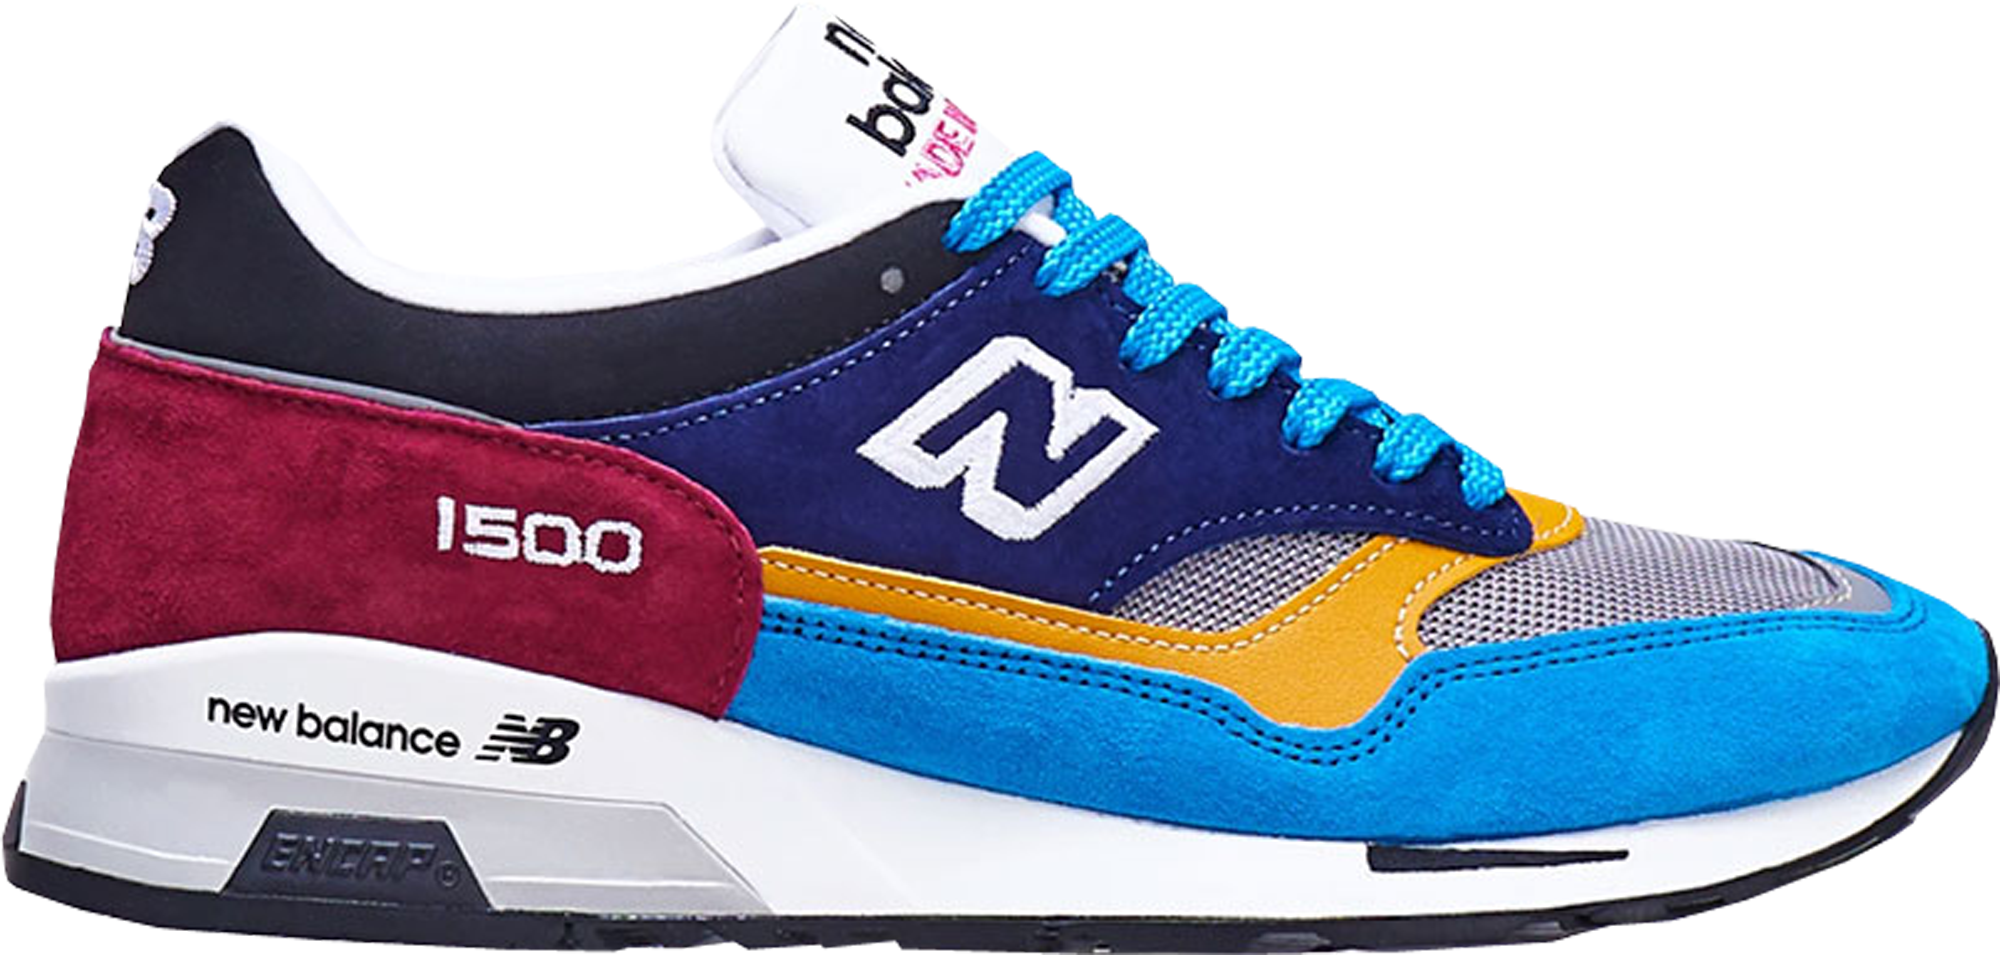 New Balance 1500 Sample Lab Blue - Sneakers